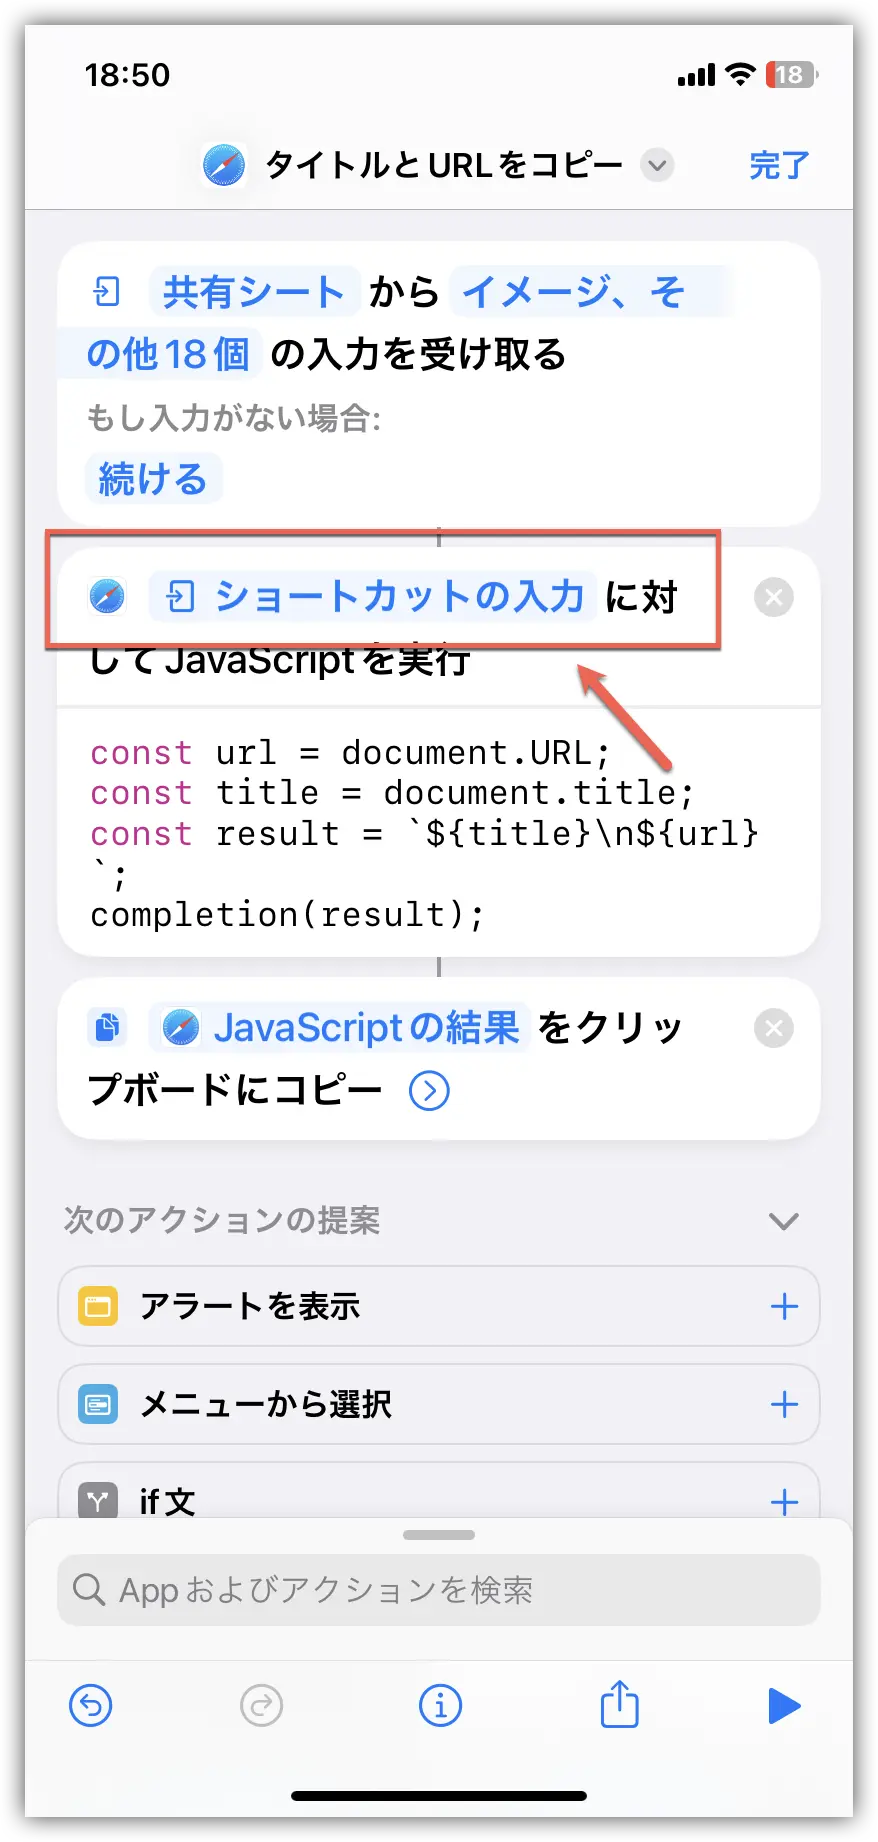 how-to-copy-title-and-url-in-ny-format-on-iphone-ios-06.webp